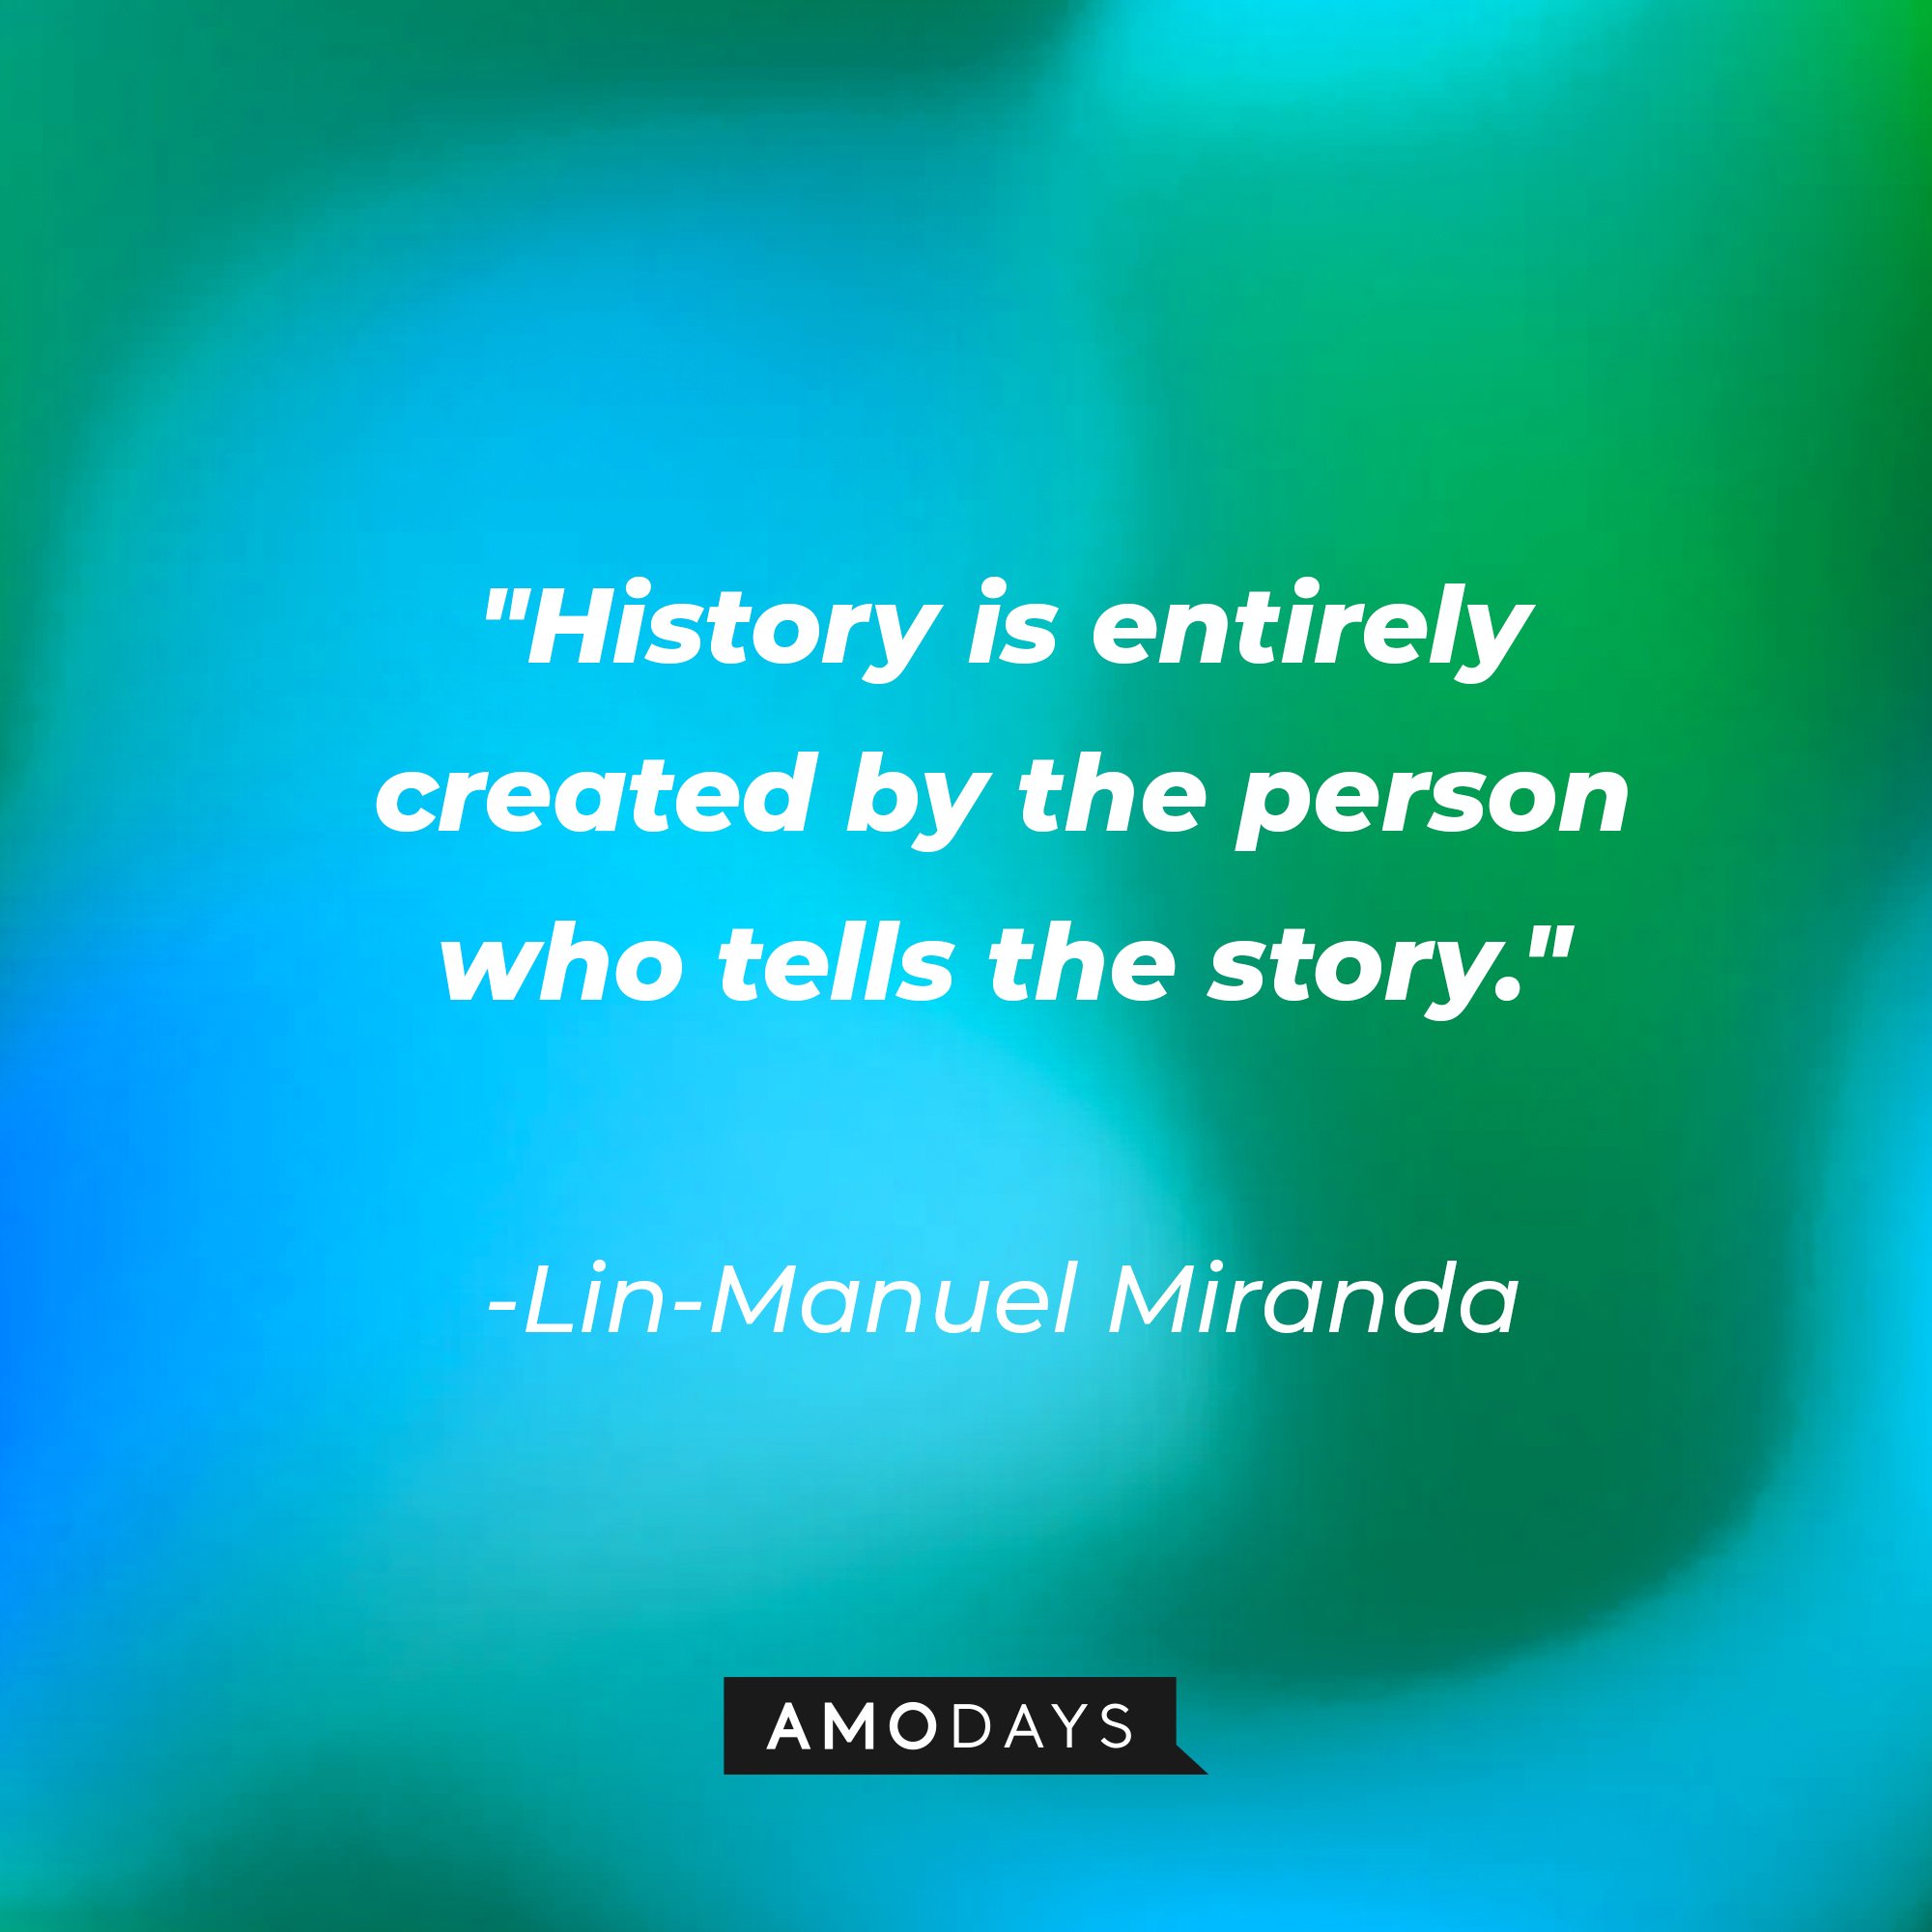 Lin-Manuel Miranda's quote: "History is entirely created by the person who tells the story." | Image: AmoDays